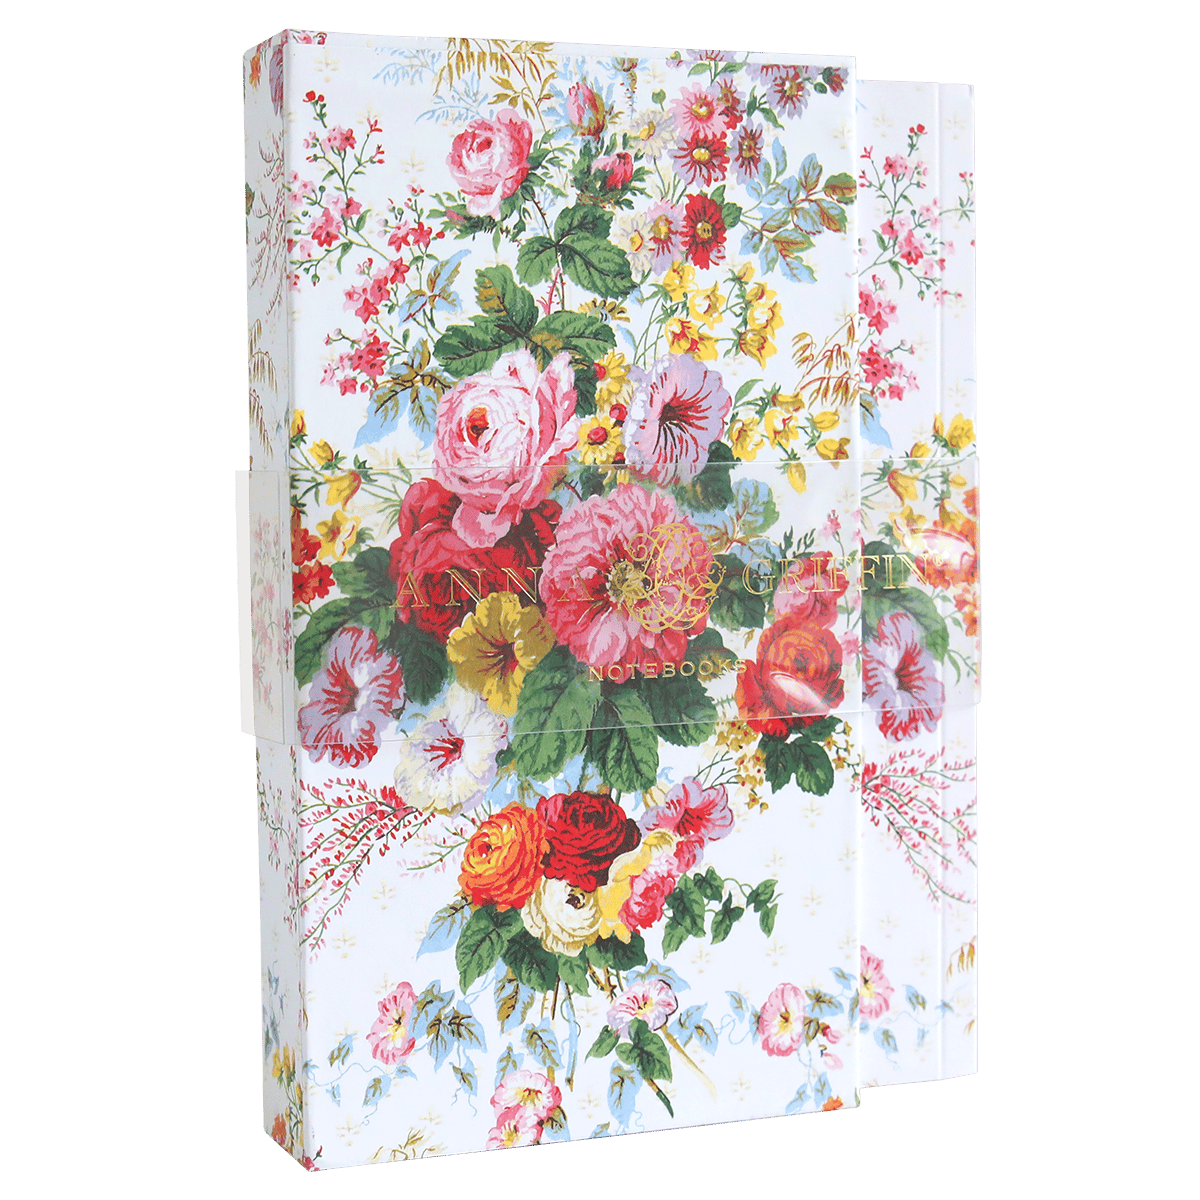 a floral print notebook with a green background.